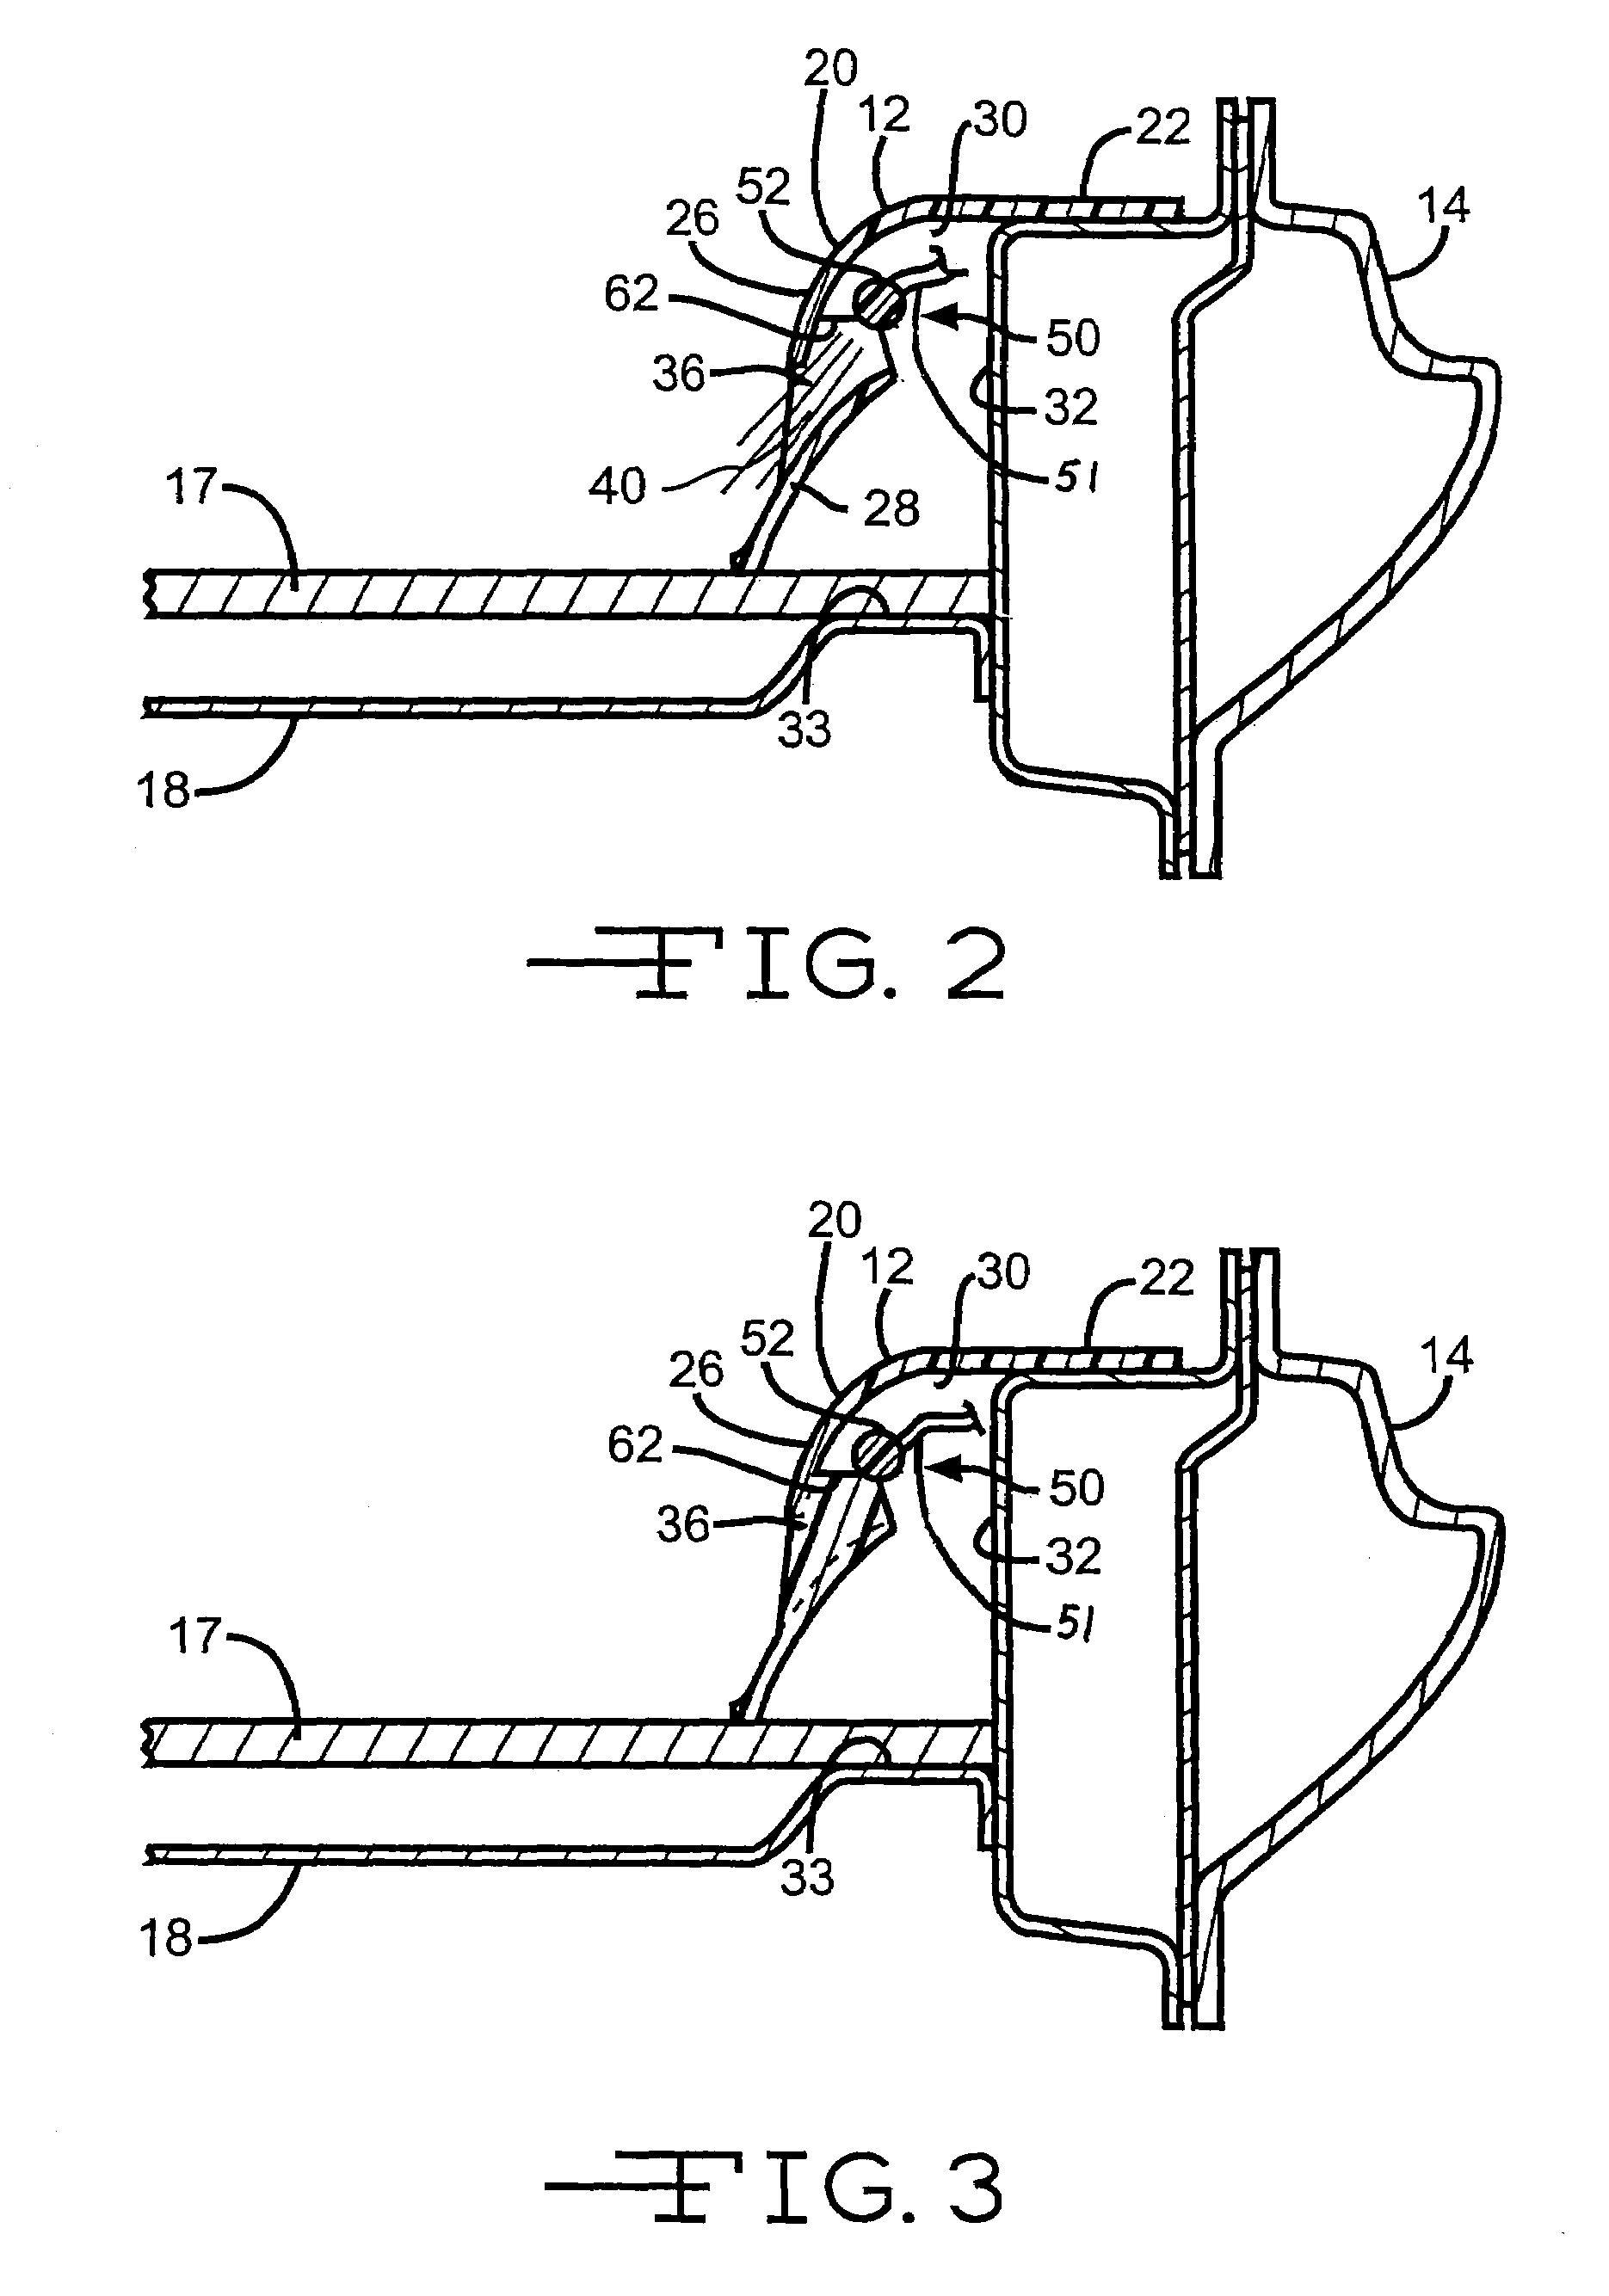 Trim component with mounted light source for indirectly lighting the interior of a vehicle